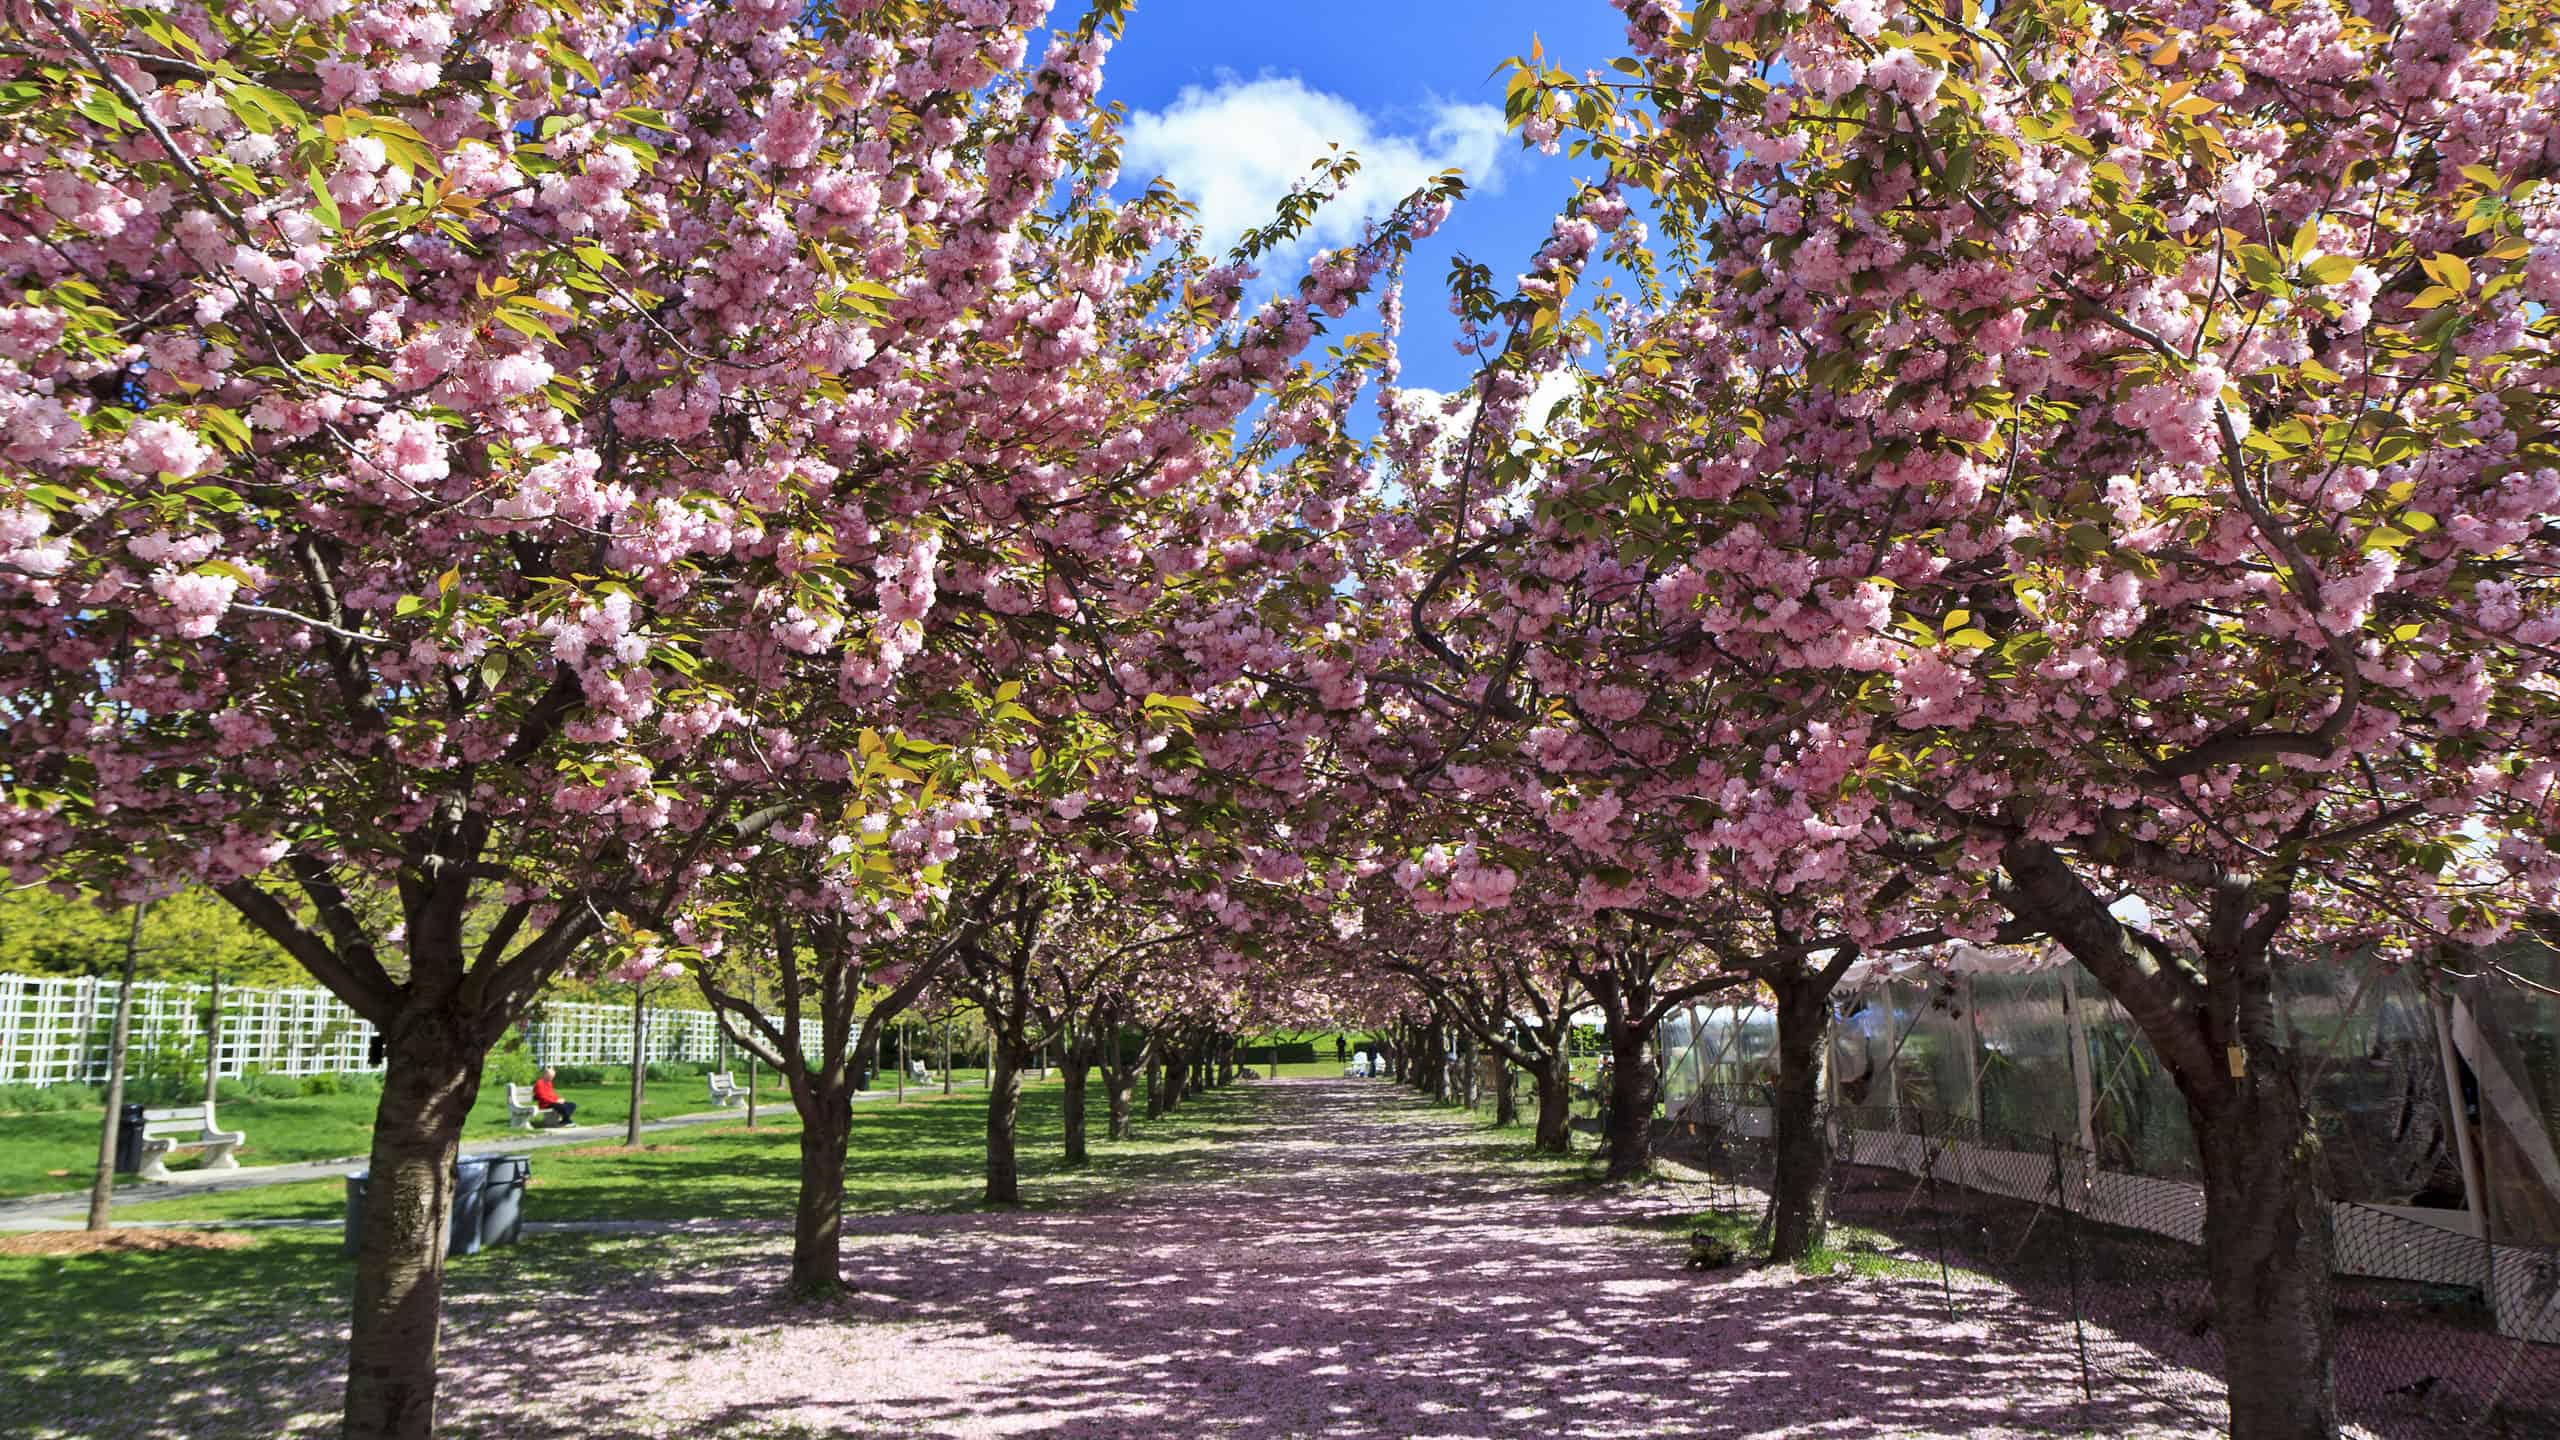 <p>The best spot to see cherry blossoms in Brooklyn is at the Brooklyn Botanic Garden which has over 200 cherry blossom trees. Many of those trees line the broad green lawn known as Cherry Esplanade. </p><p>Sharks, lions, alligators, and more! Don’t miss today’s latest and most exciting animal news. <strong><a href="https://www.msn.com/en-us/channel/source/AZ%20Animals%20US/sr-vid-7etr9q8xun6k6508c3nufaum0de3dqktiq6h27ddeagnfug30wka">Click here to access the A-Z Animals profile page</a> and be sure to hit the <em>Follow</em> button here or at the top of this article!</strong></p> <p>Have feedback? Add a comment below!</p>